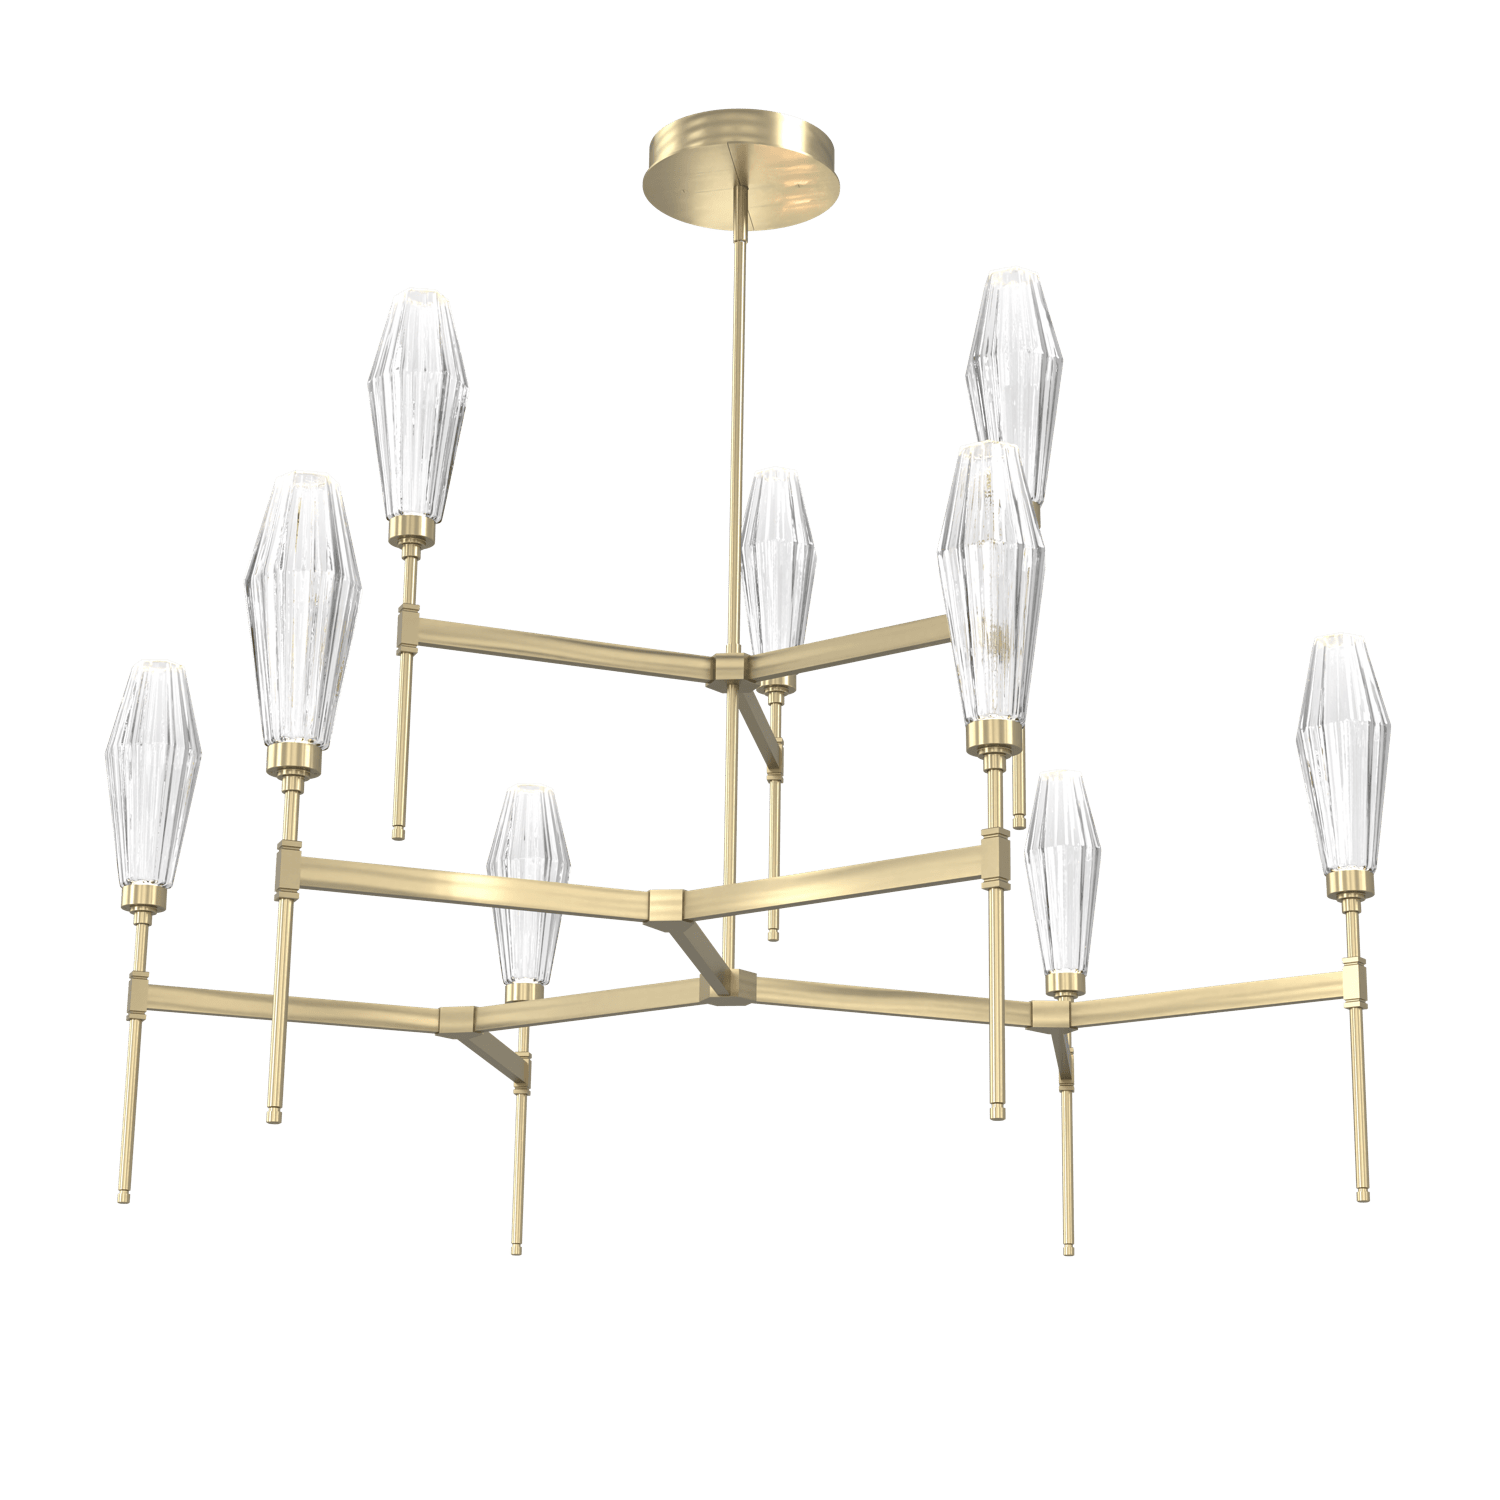 CHB0049-54-HB-RC-Hammerton-Studio-Aalto-54-inch-round-two-tier-belvedere-chandelier-with-heritage-brass-finish-and-optic-ribbed-clear-glass-shades-and-LED-lamping